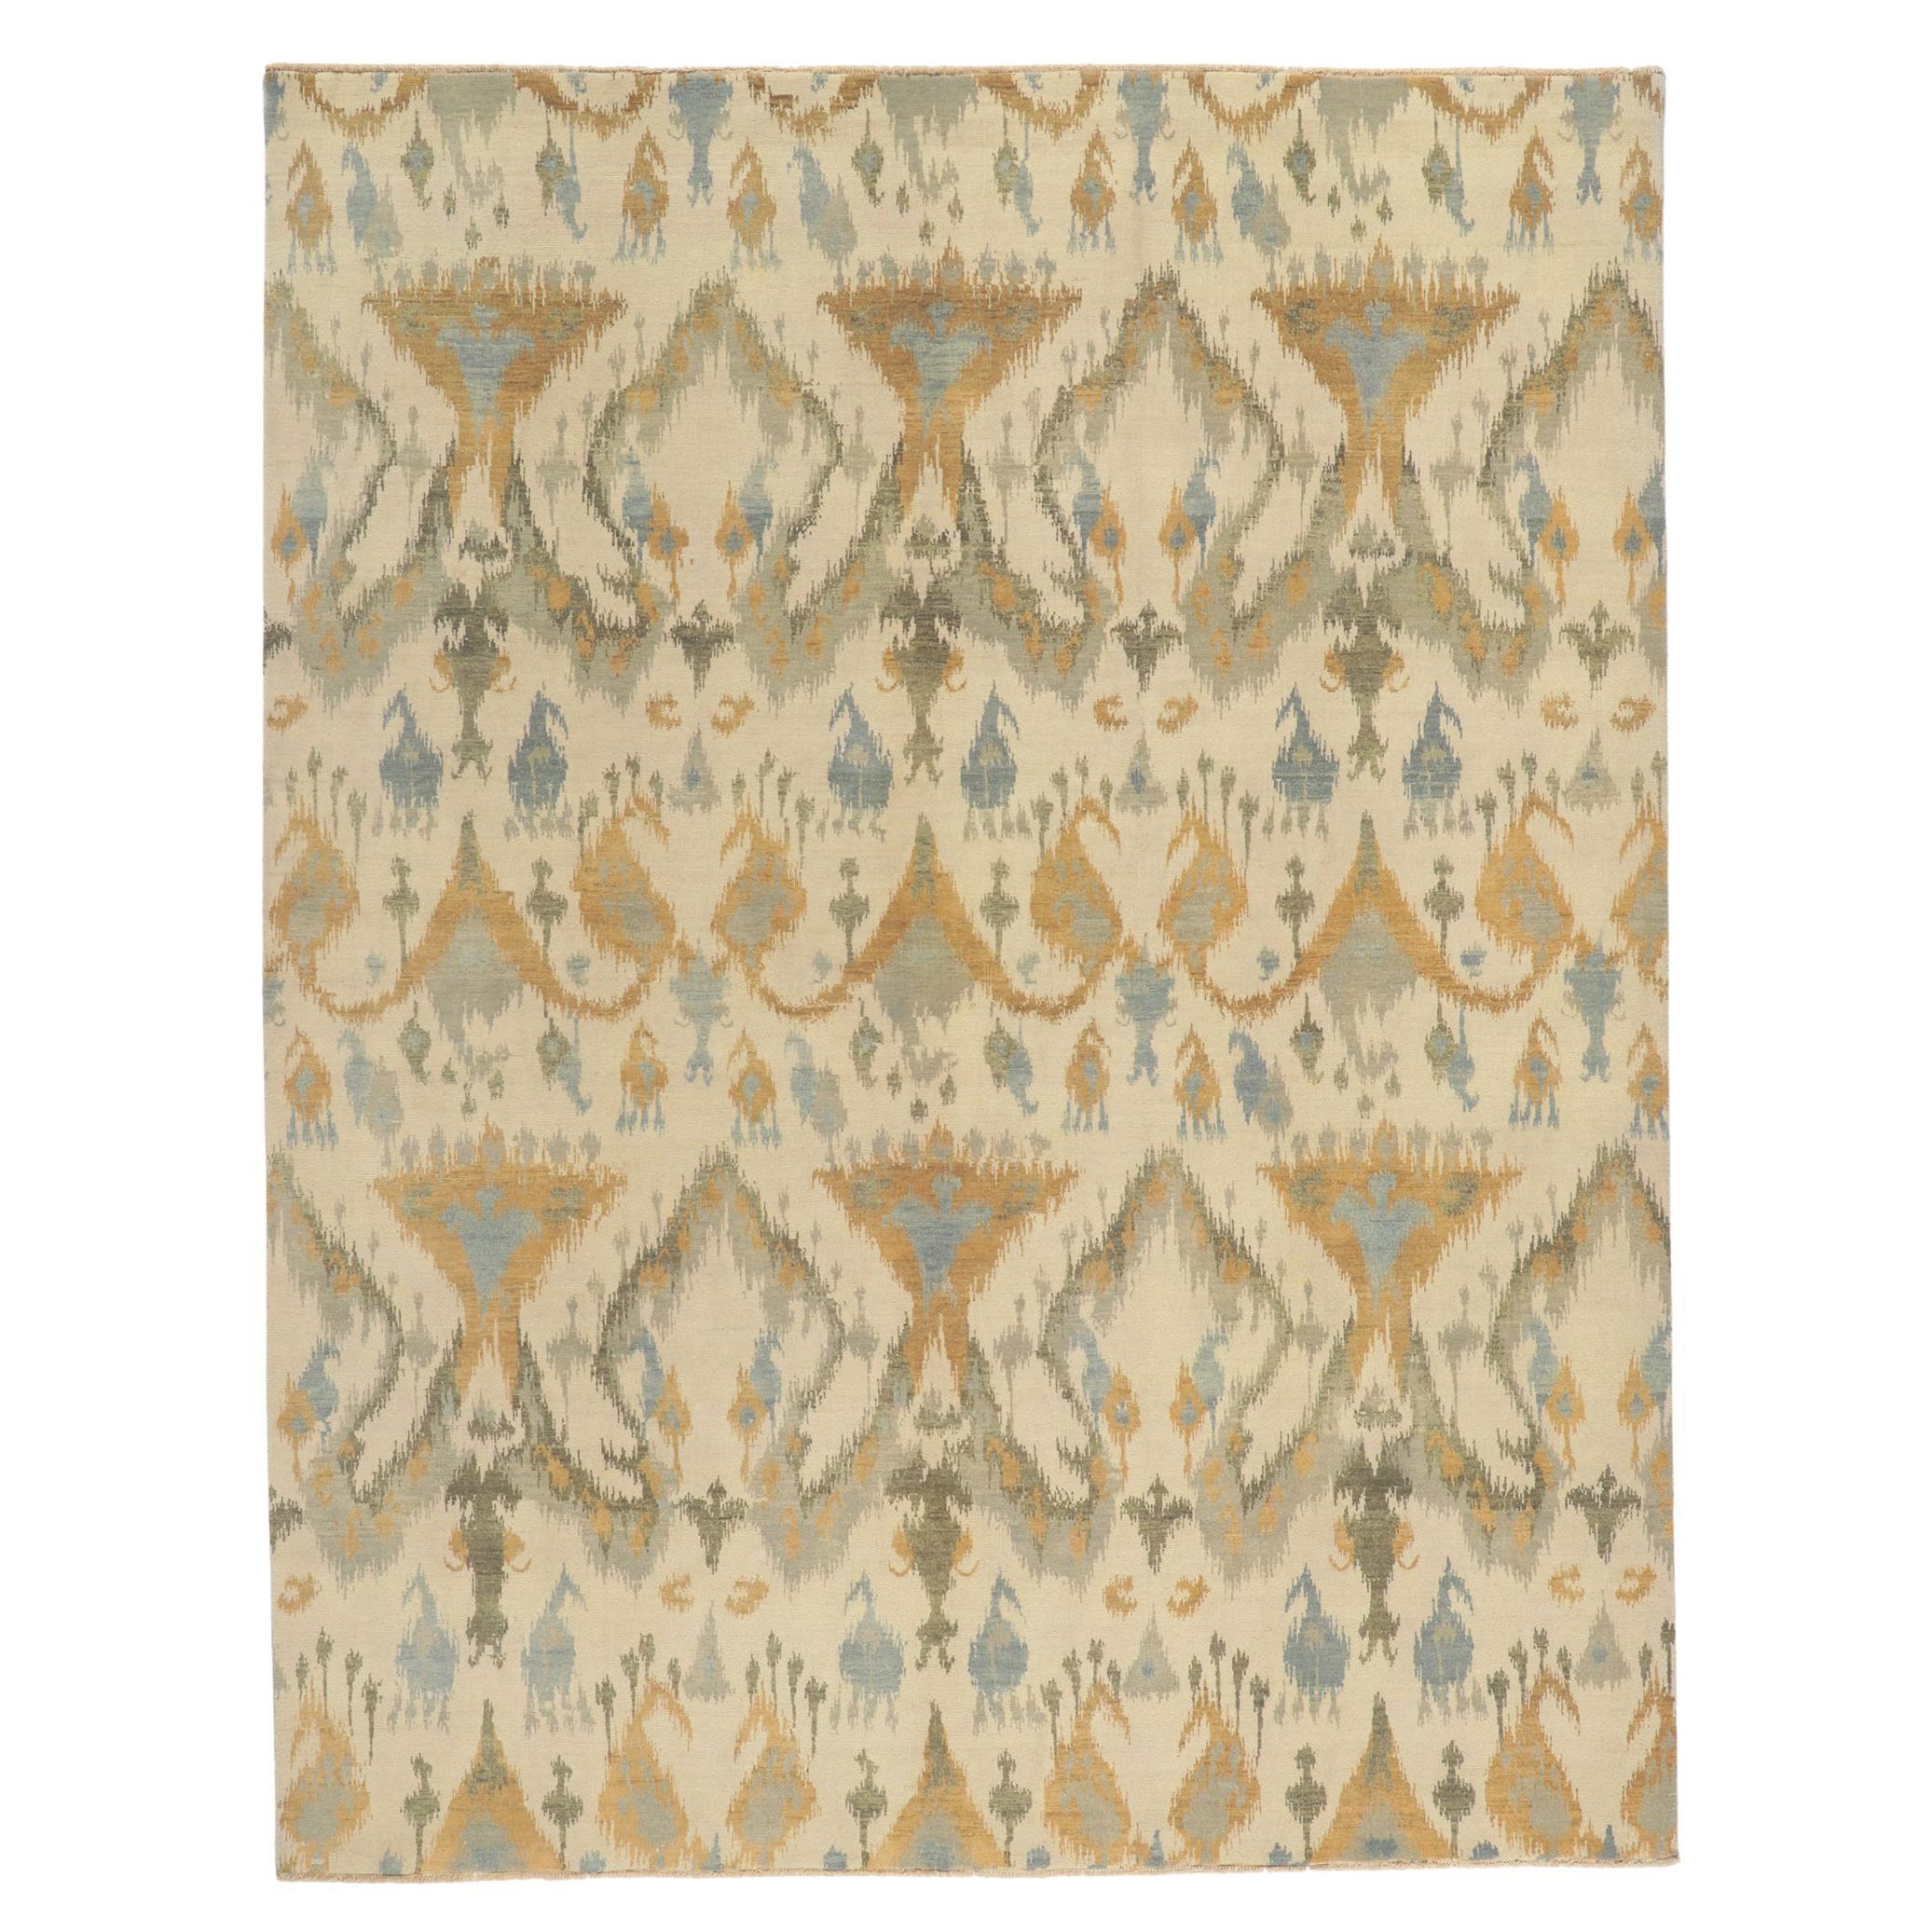 New Earth-Tone Ikat Rug with Modern Style For Sale